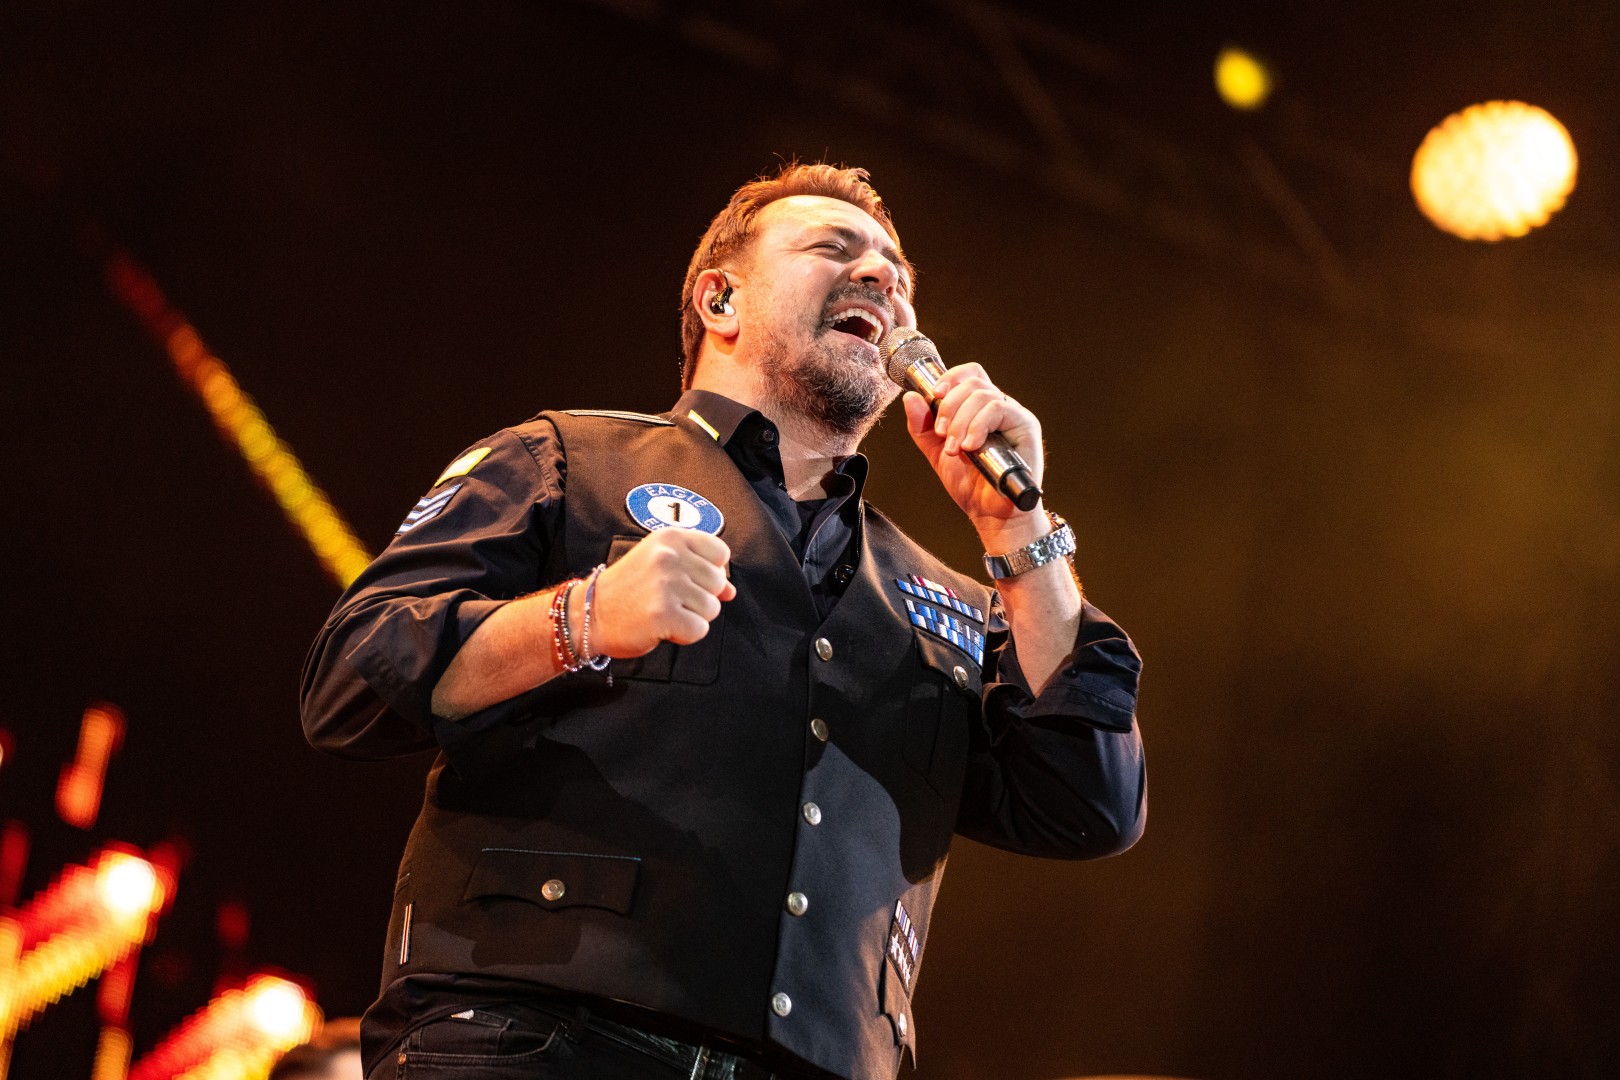 Horia Brenciu at National Arena in Bucharest on March 12, 2022 (d19392f6b8)